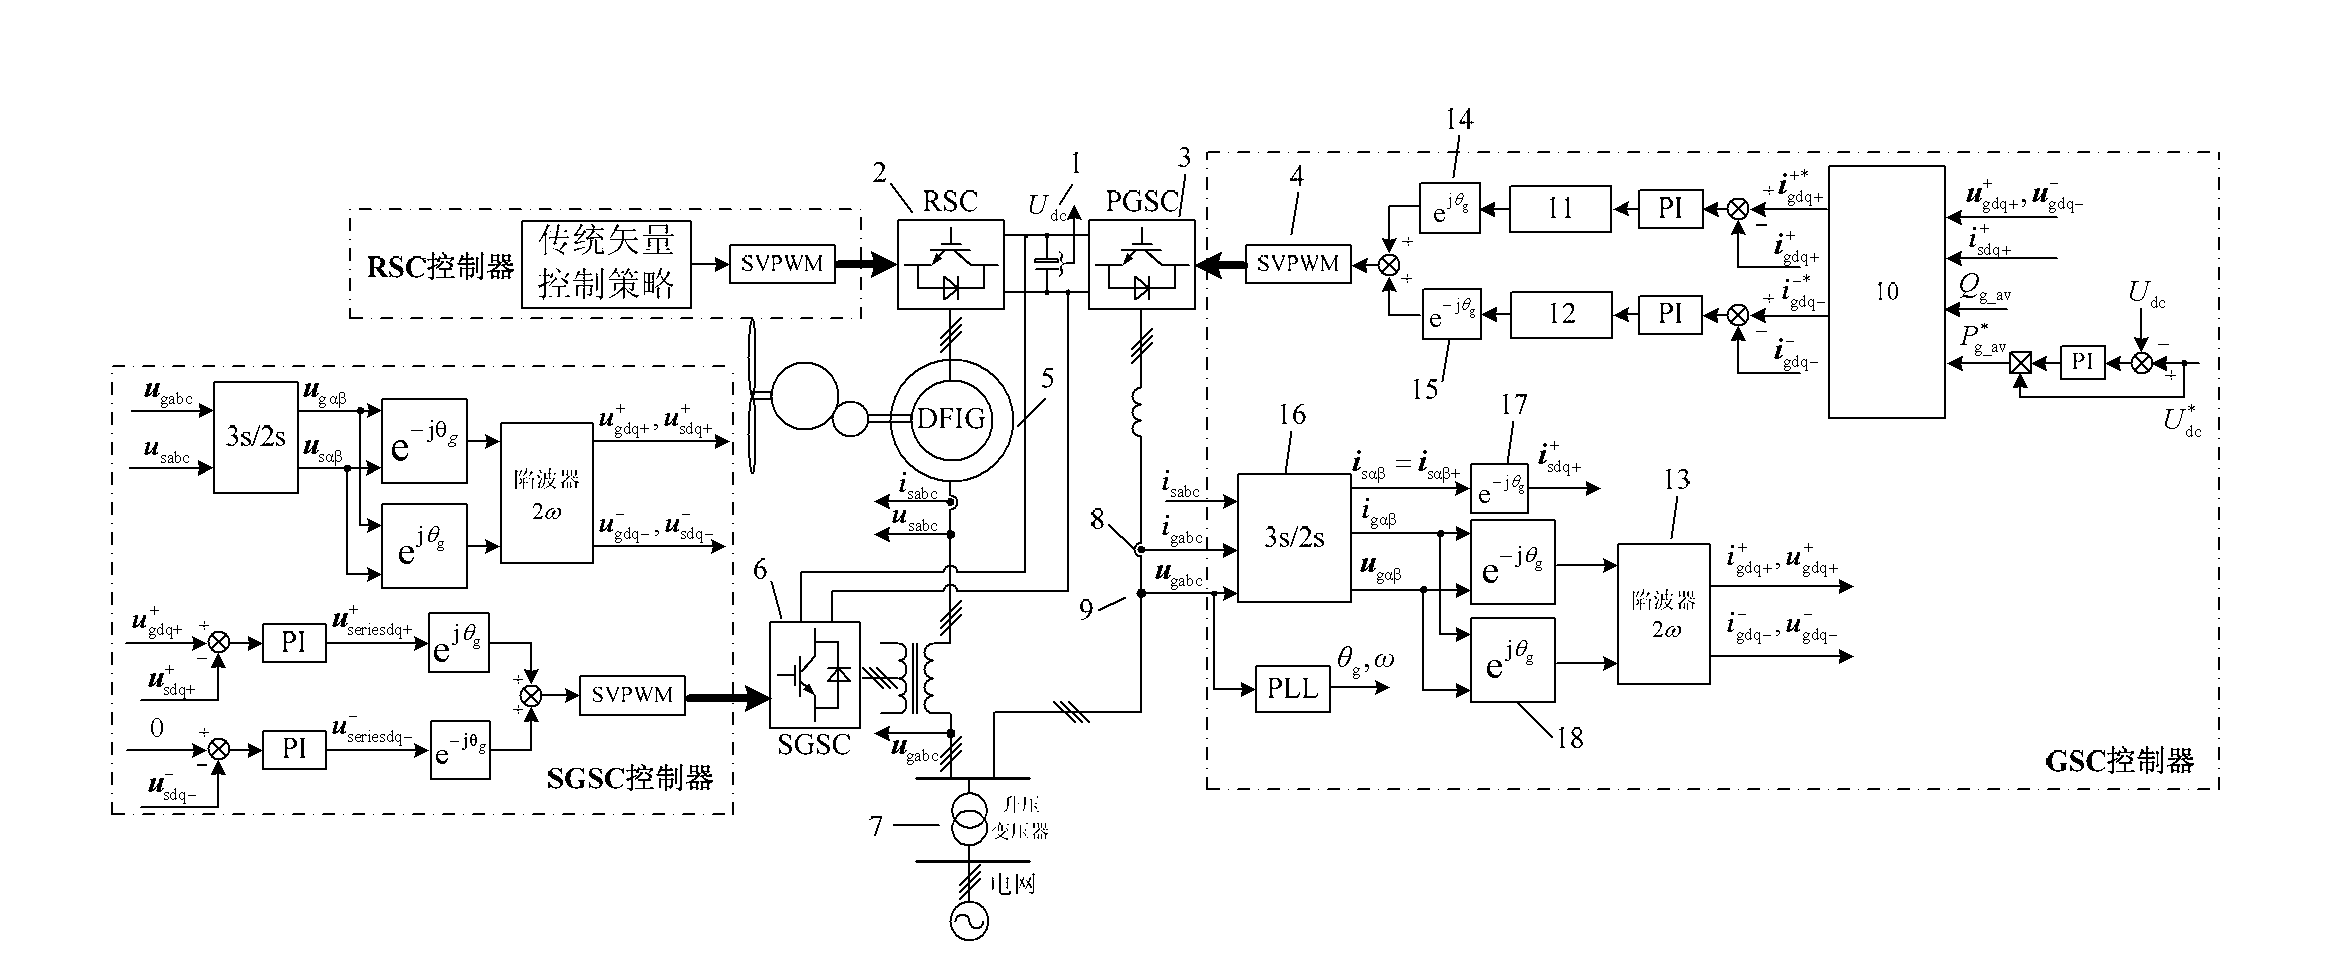 Method for suppressing total output reactive power fluctuation by adopting doubly-fed induction wind power system with series grid-side converter under unbalanced voltage